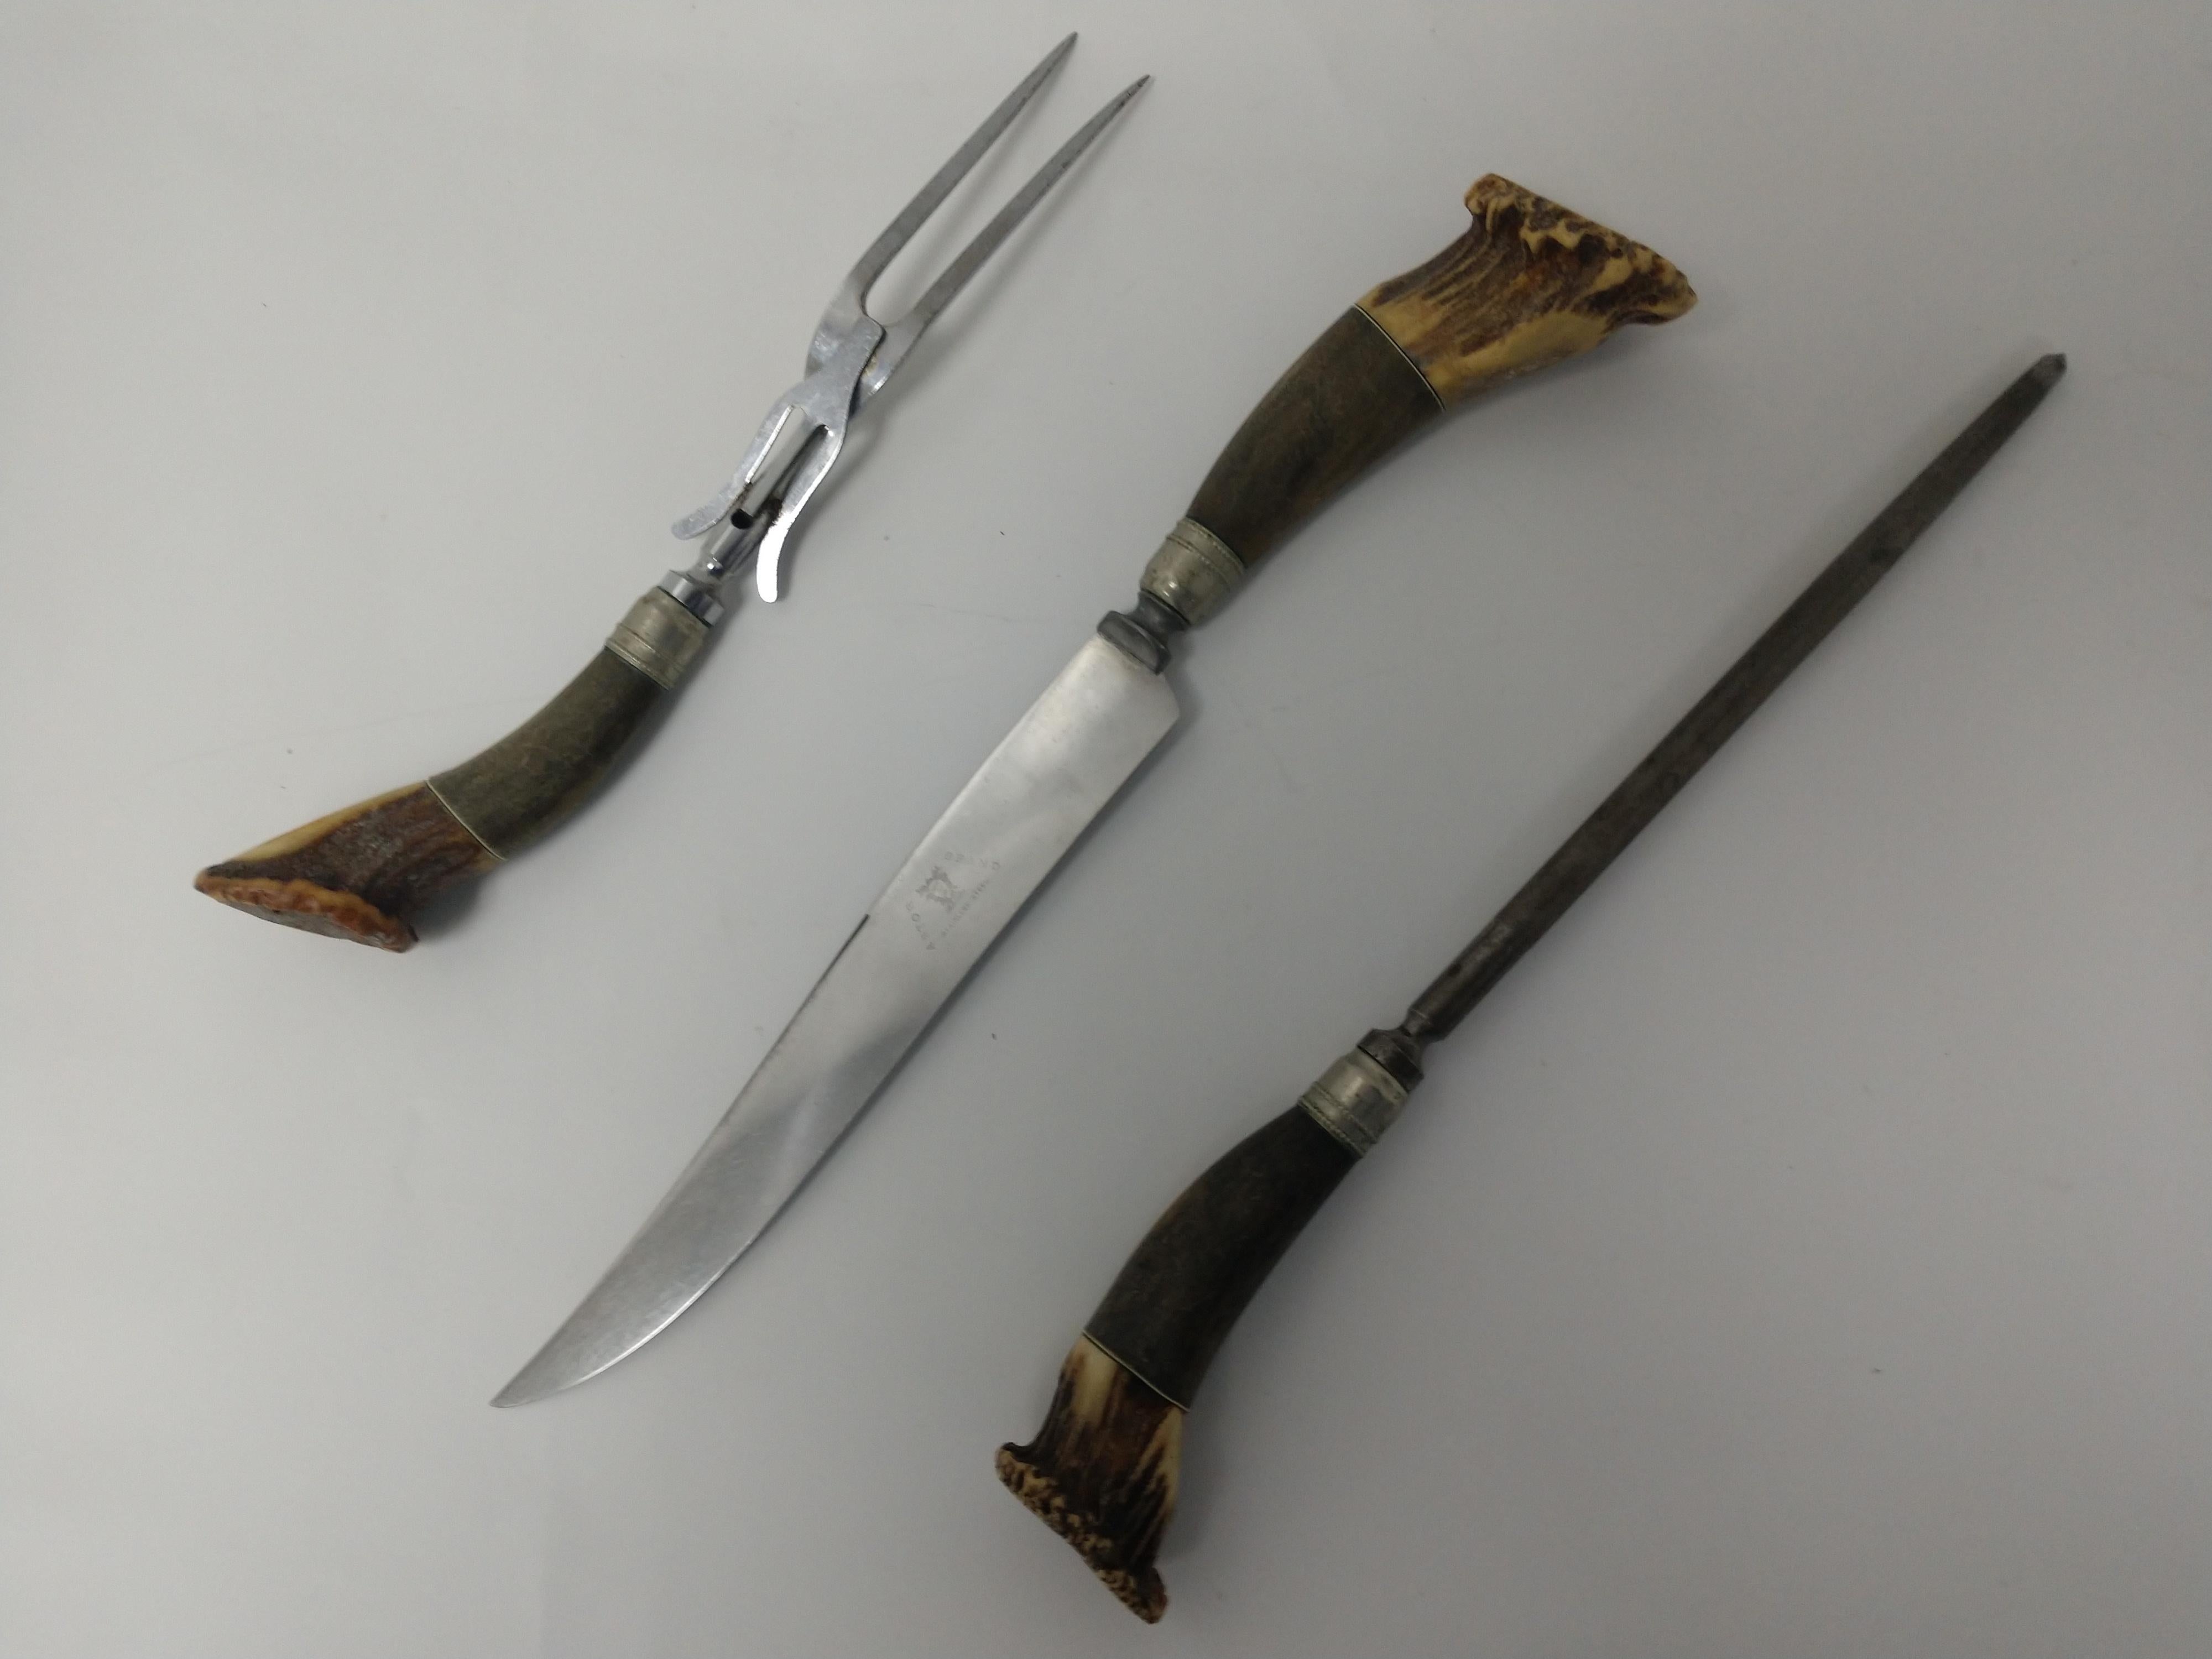 3-piece set of stag horn cutlery. Knife, fork and a sharpener. All in excellent vintage condition.